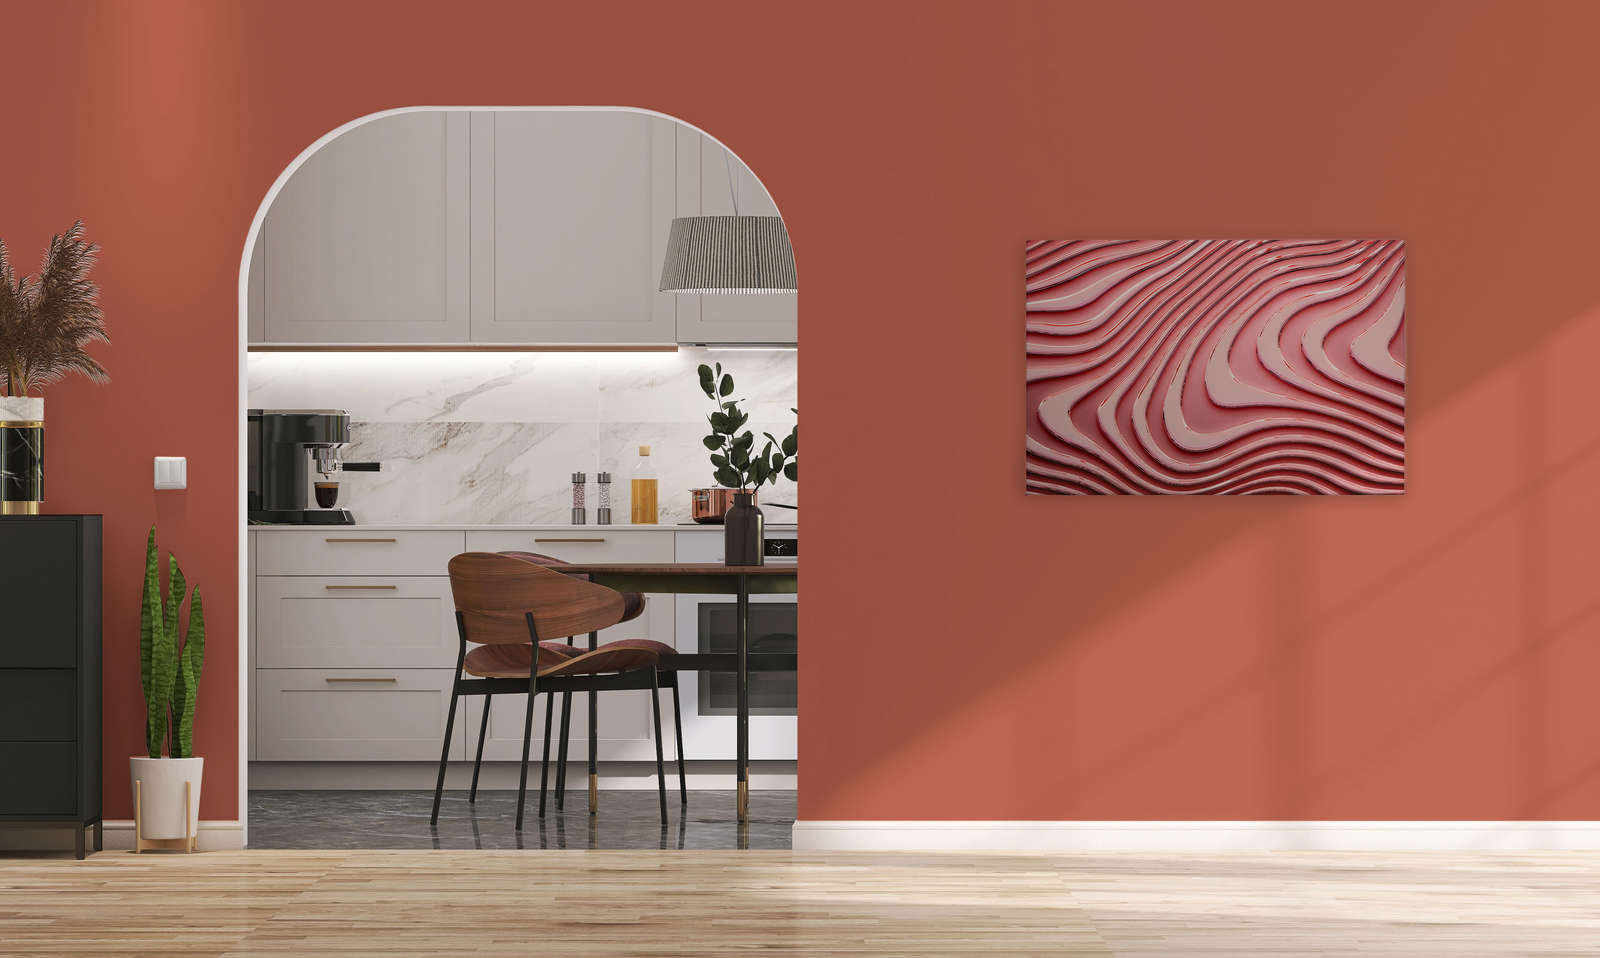             Canvas painting with wavy lines and shadows | pink, pink - 0.90 m x 0.60 m
        